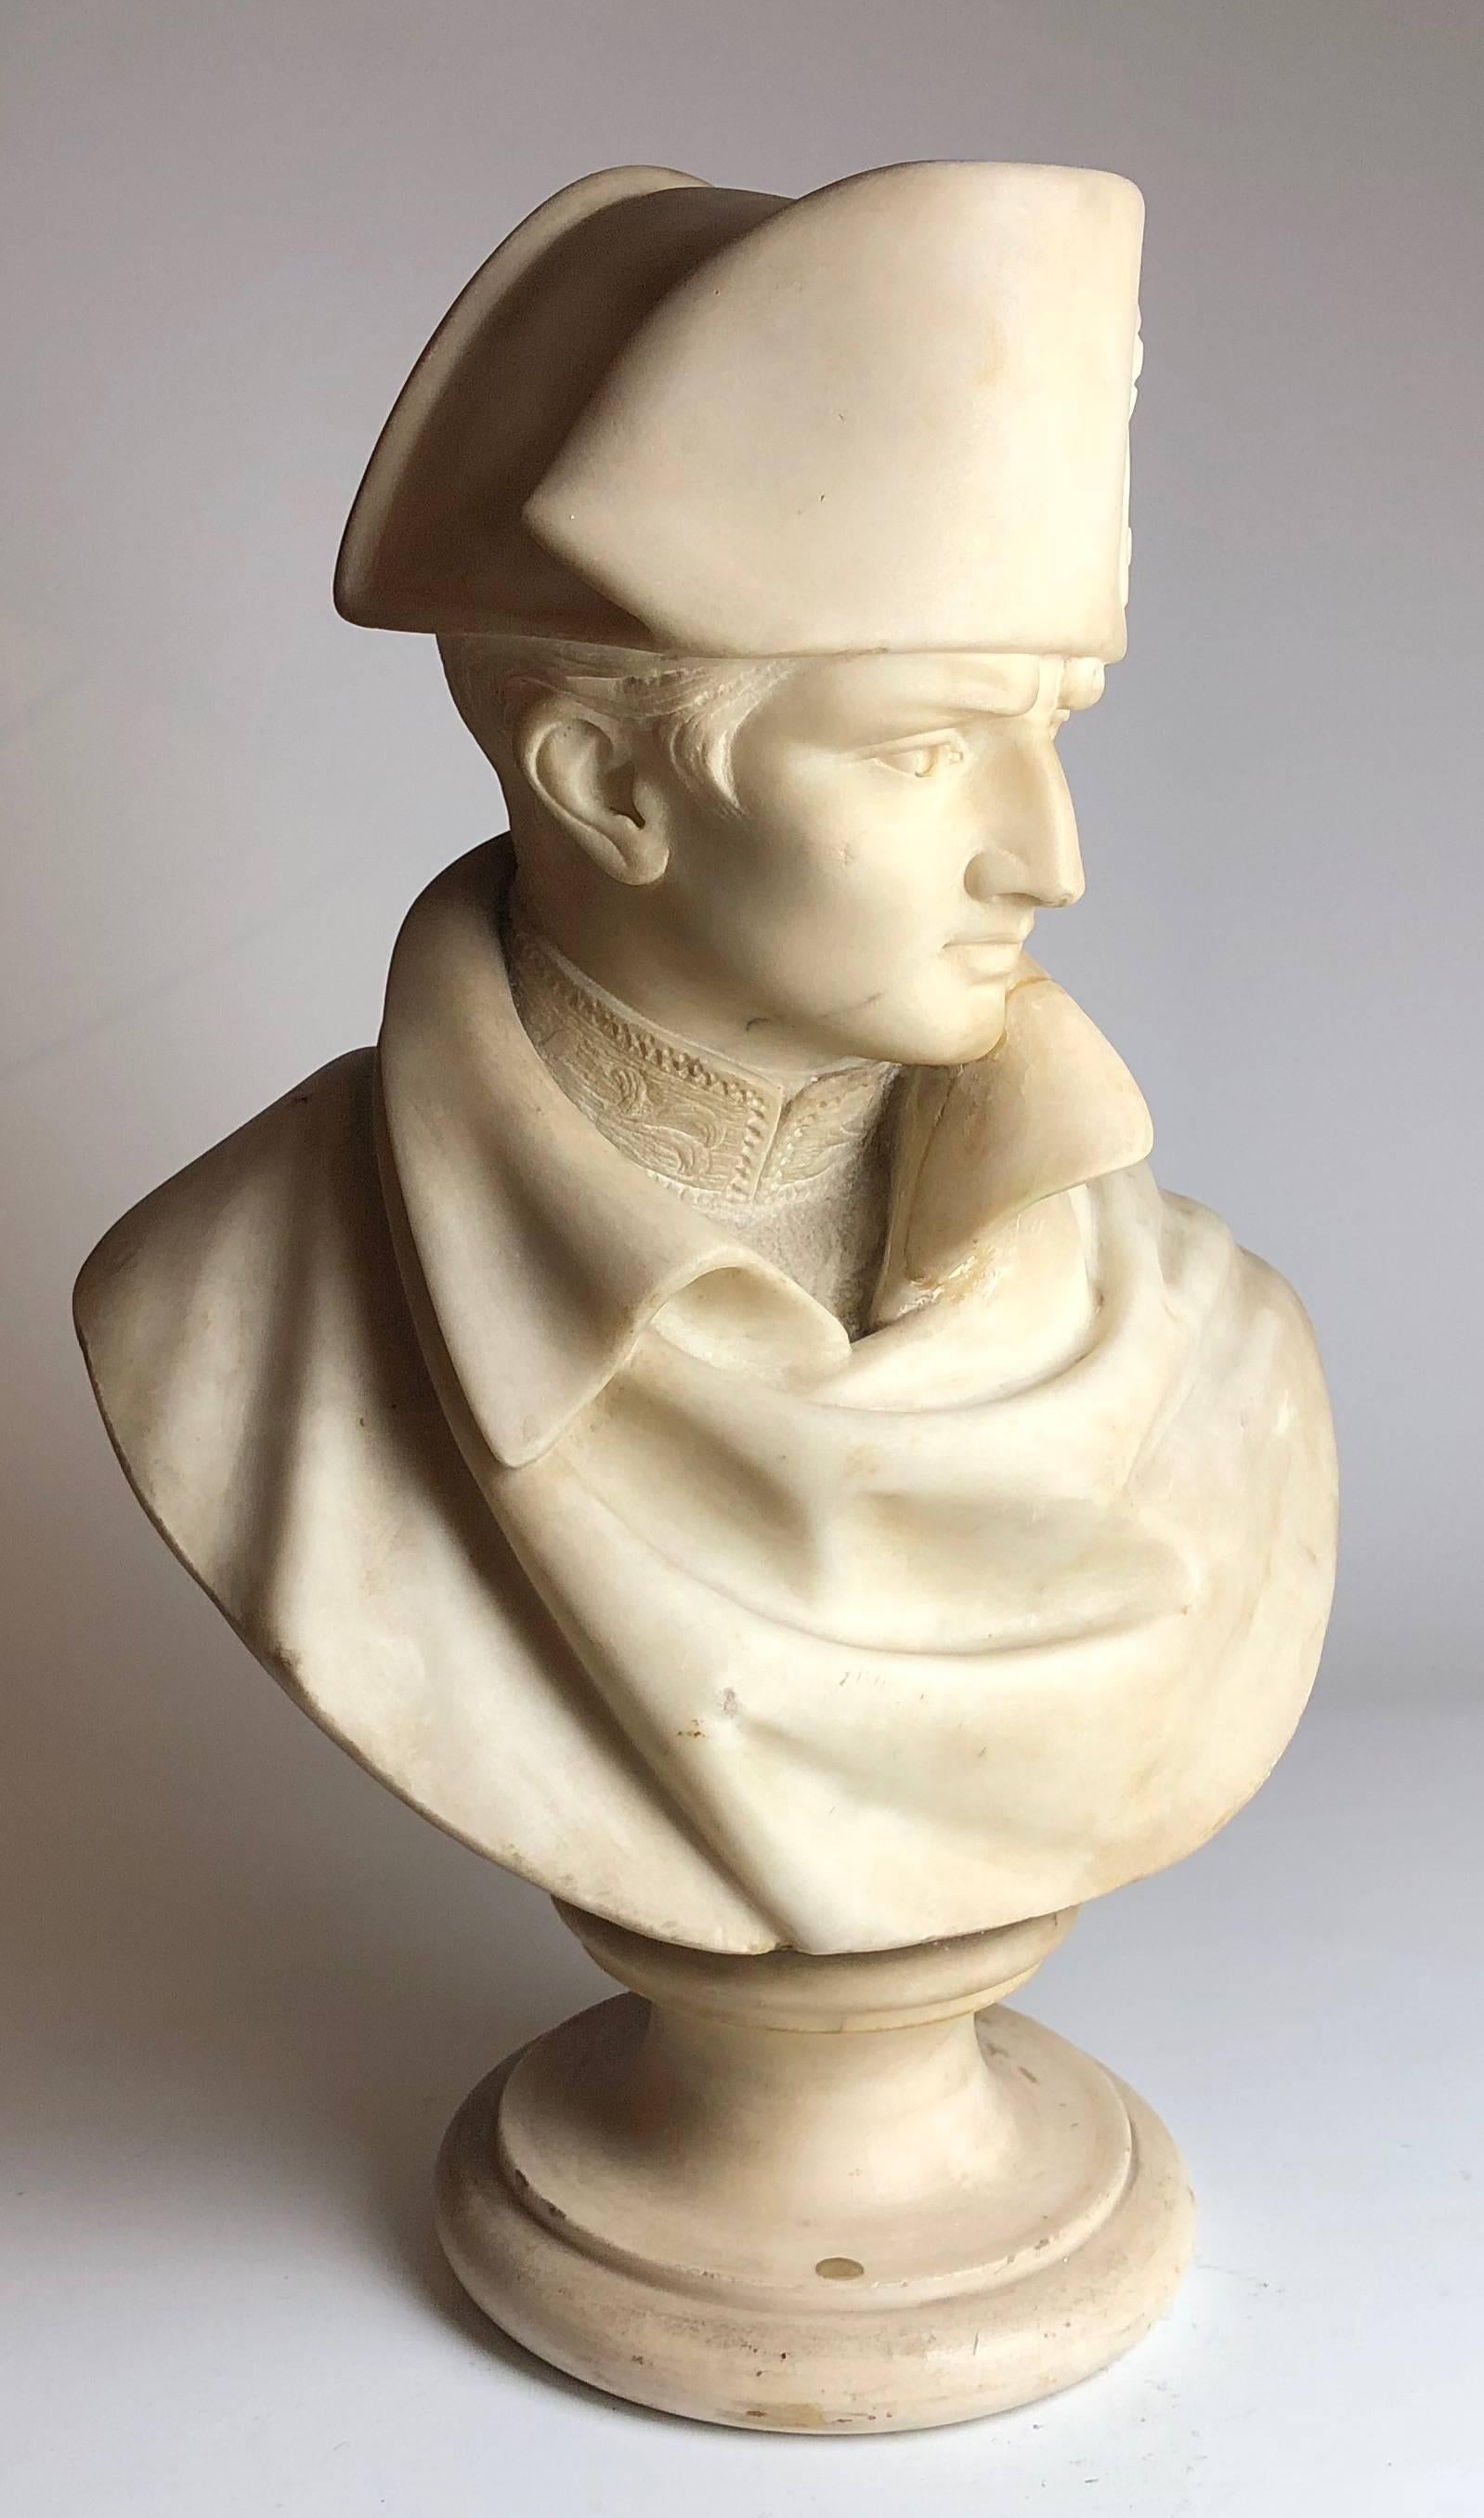 An excellent quality signed Italian white marble bust of a youthful looking Napoleon.
Signed and marked Florence

Italy

The bust stands 19" tall and is 15" at the widest point.

CIRCA 1850